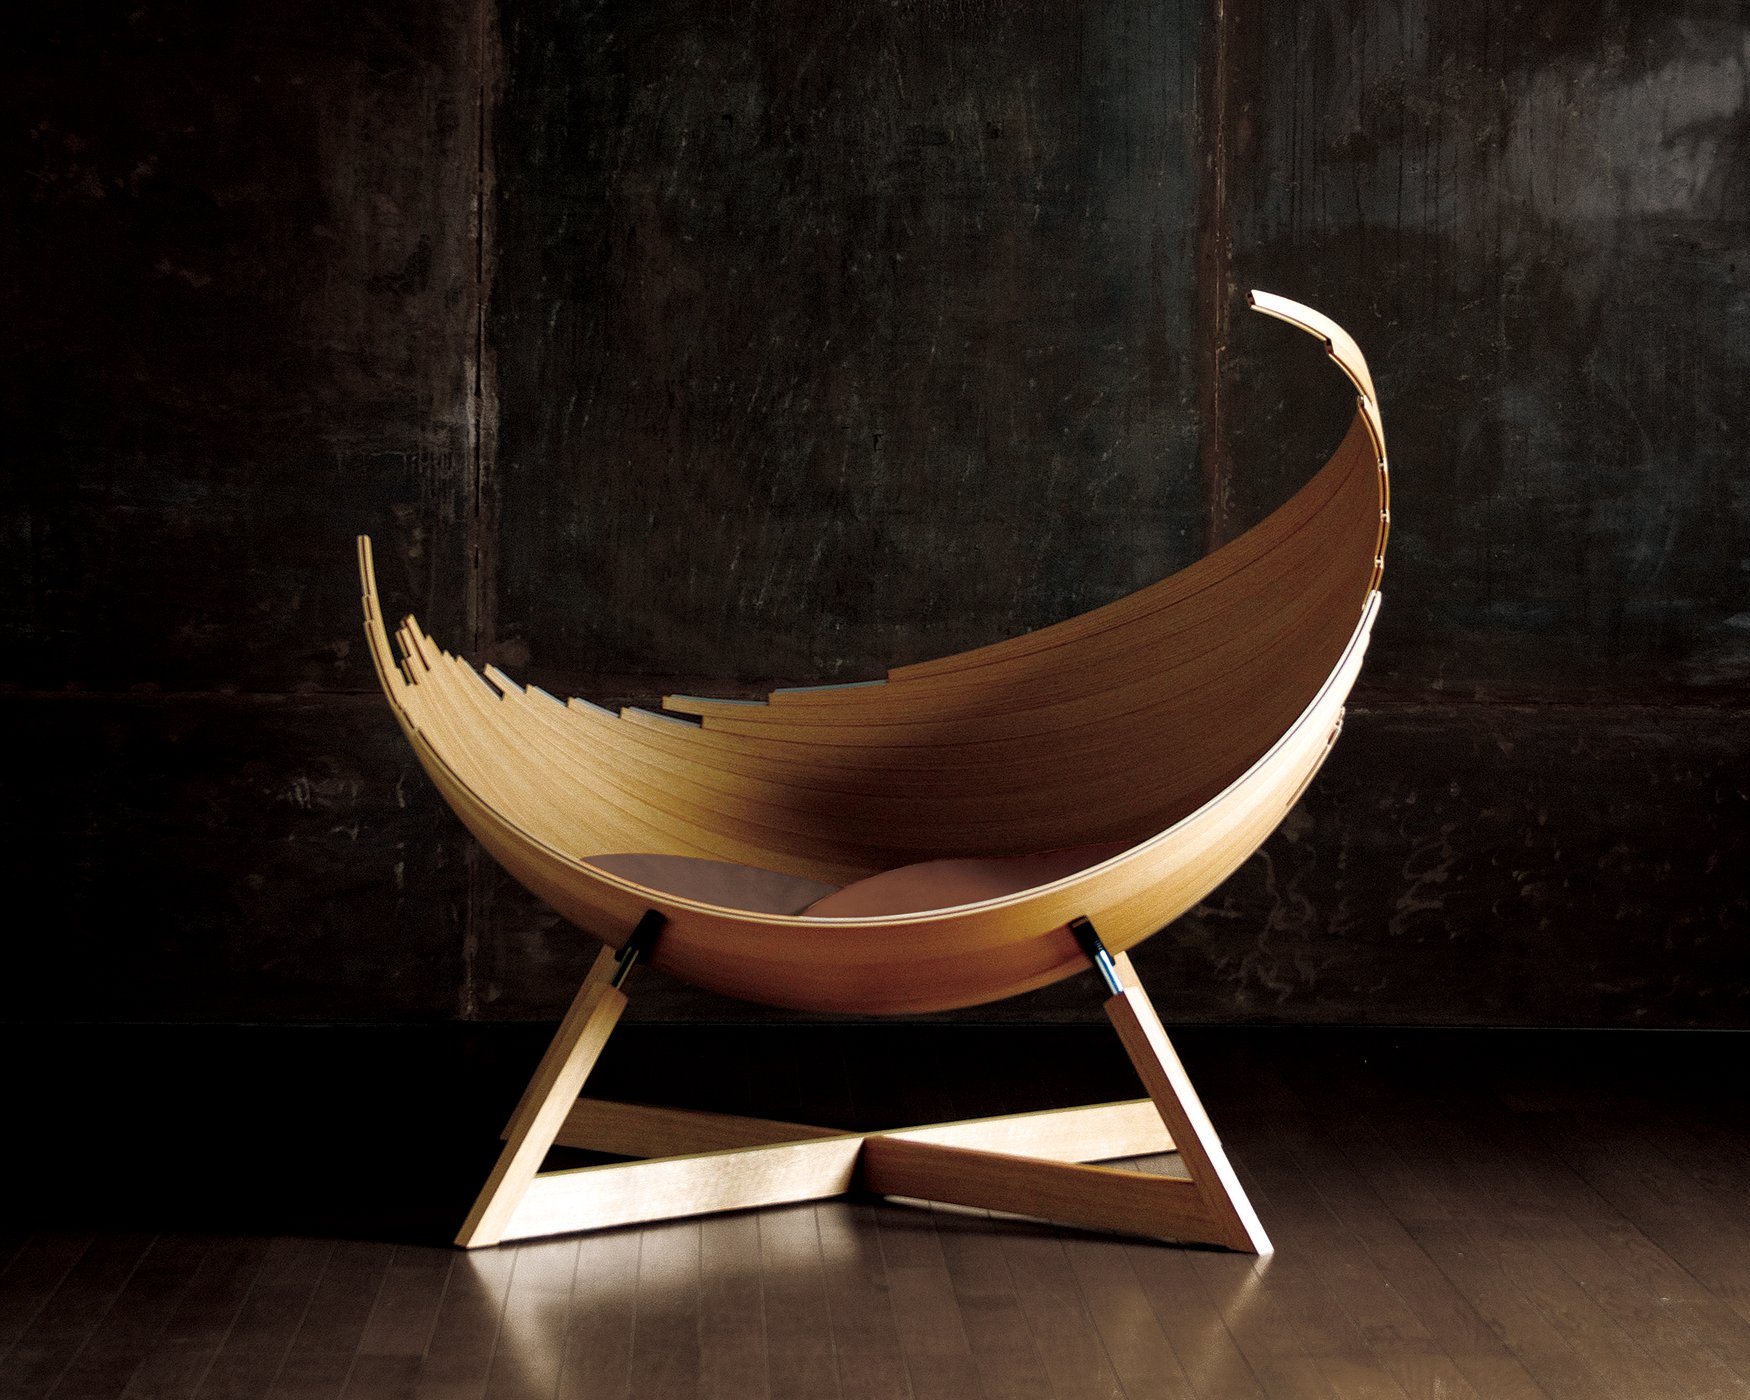 Products Born from the International Furniture Design Competition [IFDA]